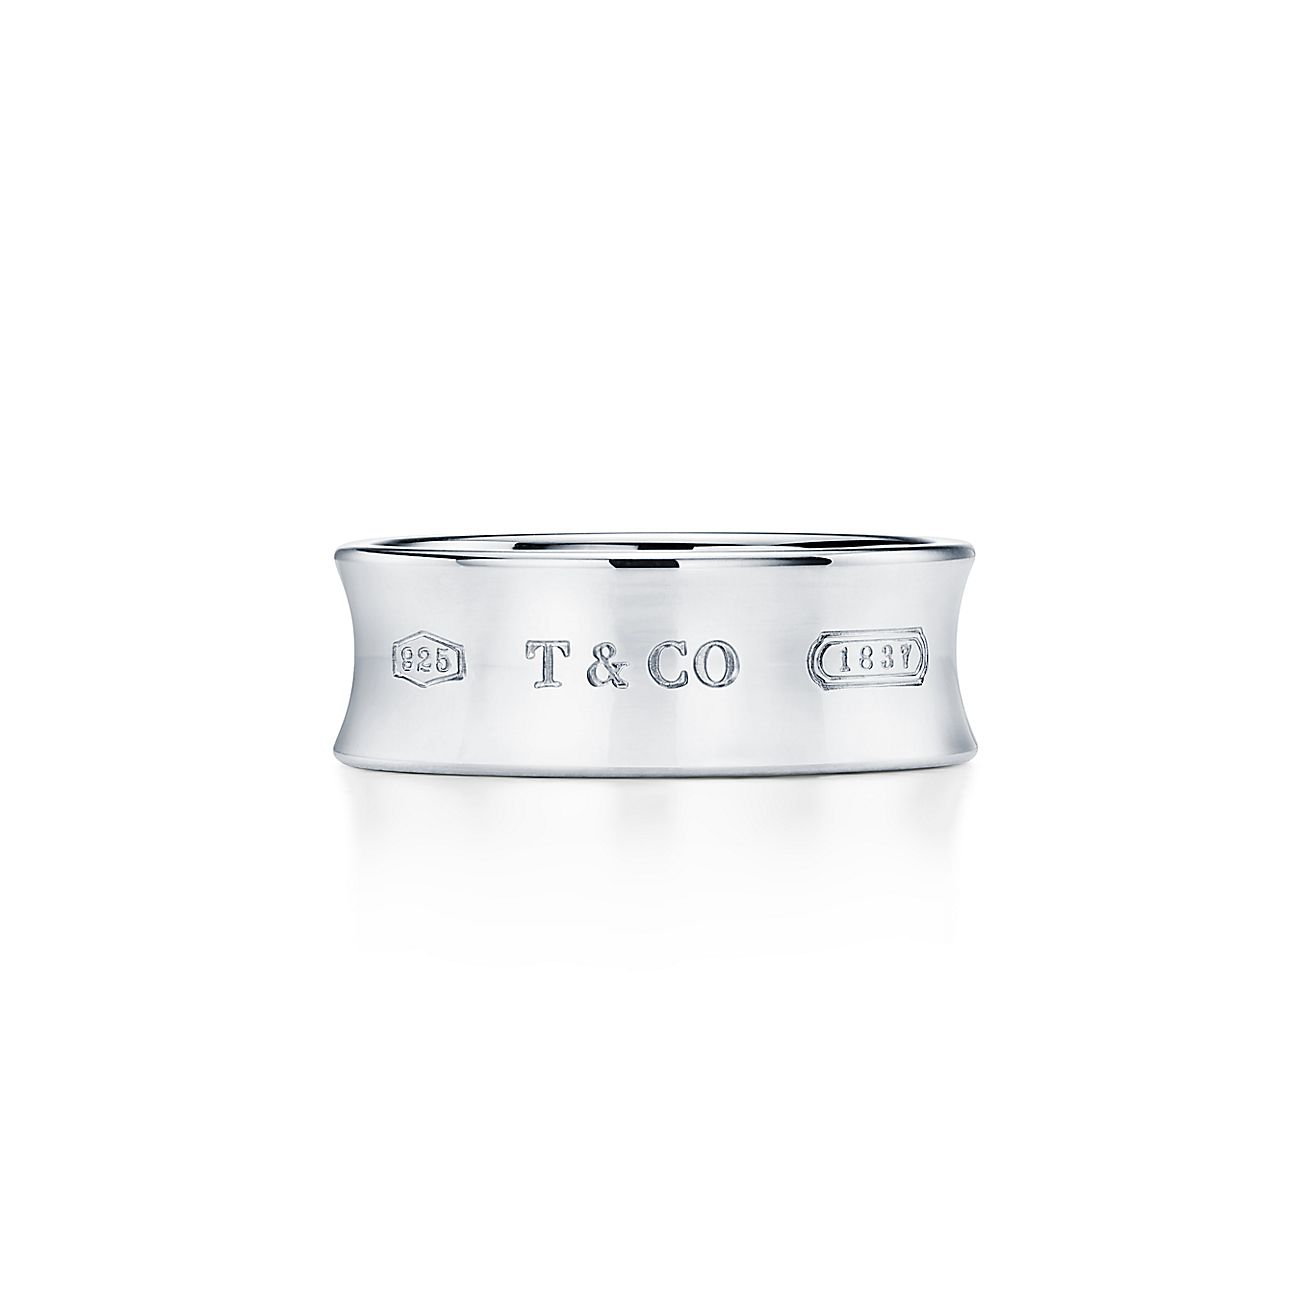 Tiffany 1837® Makers signet ring in sterling silver, 12 mm wide